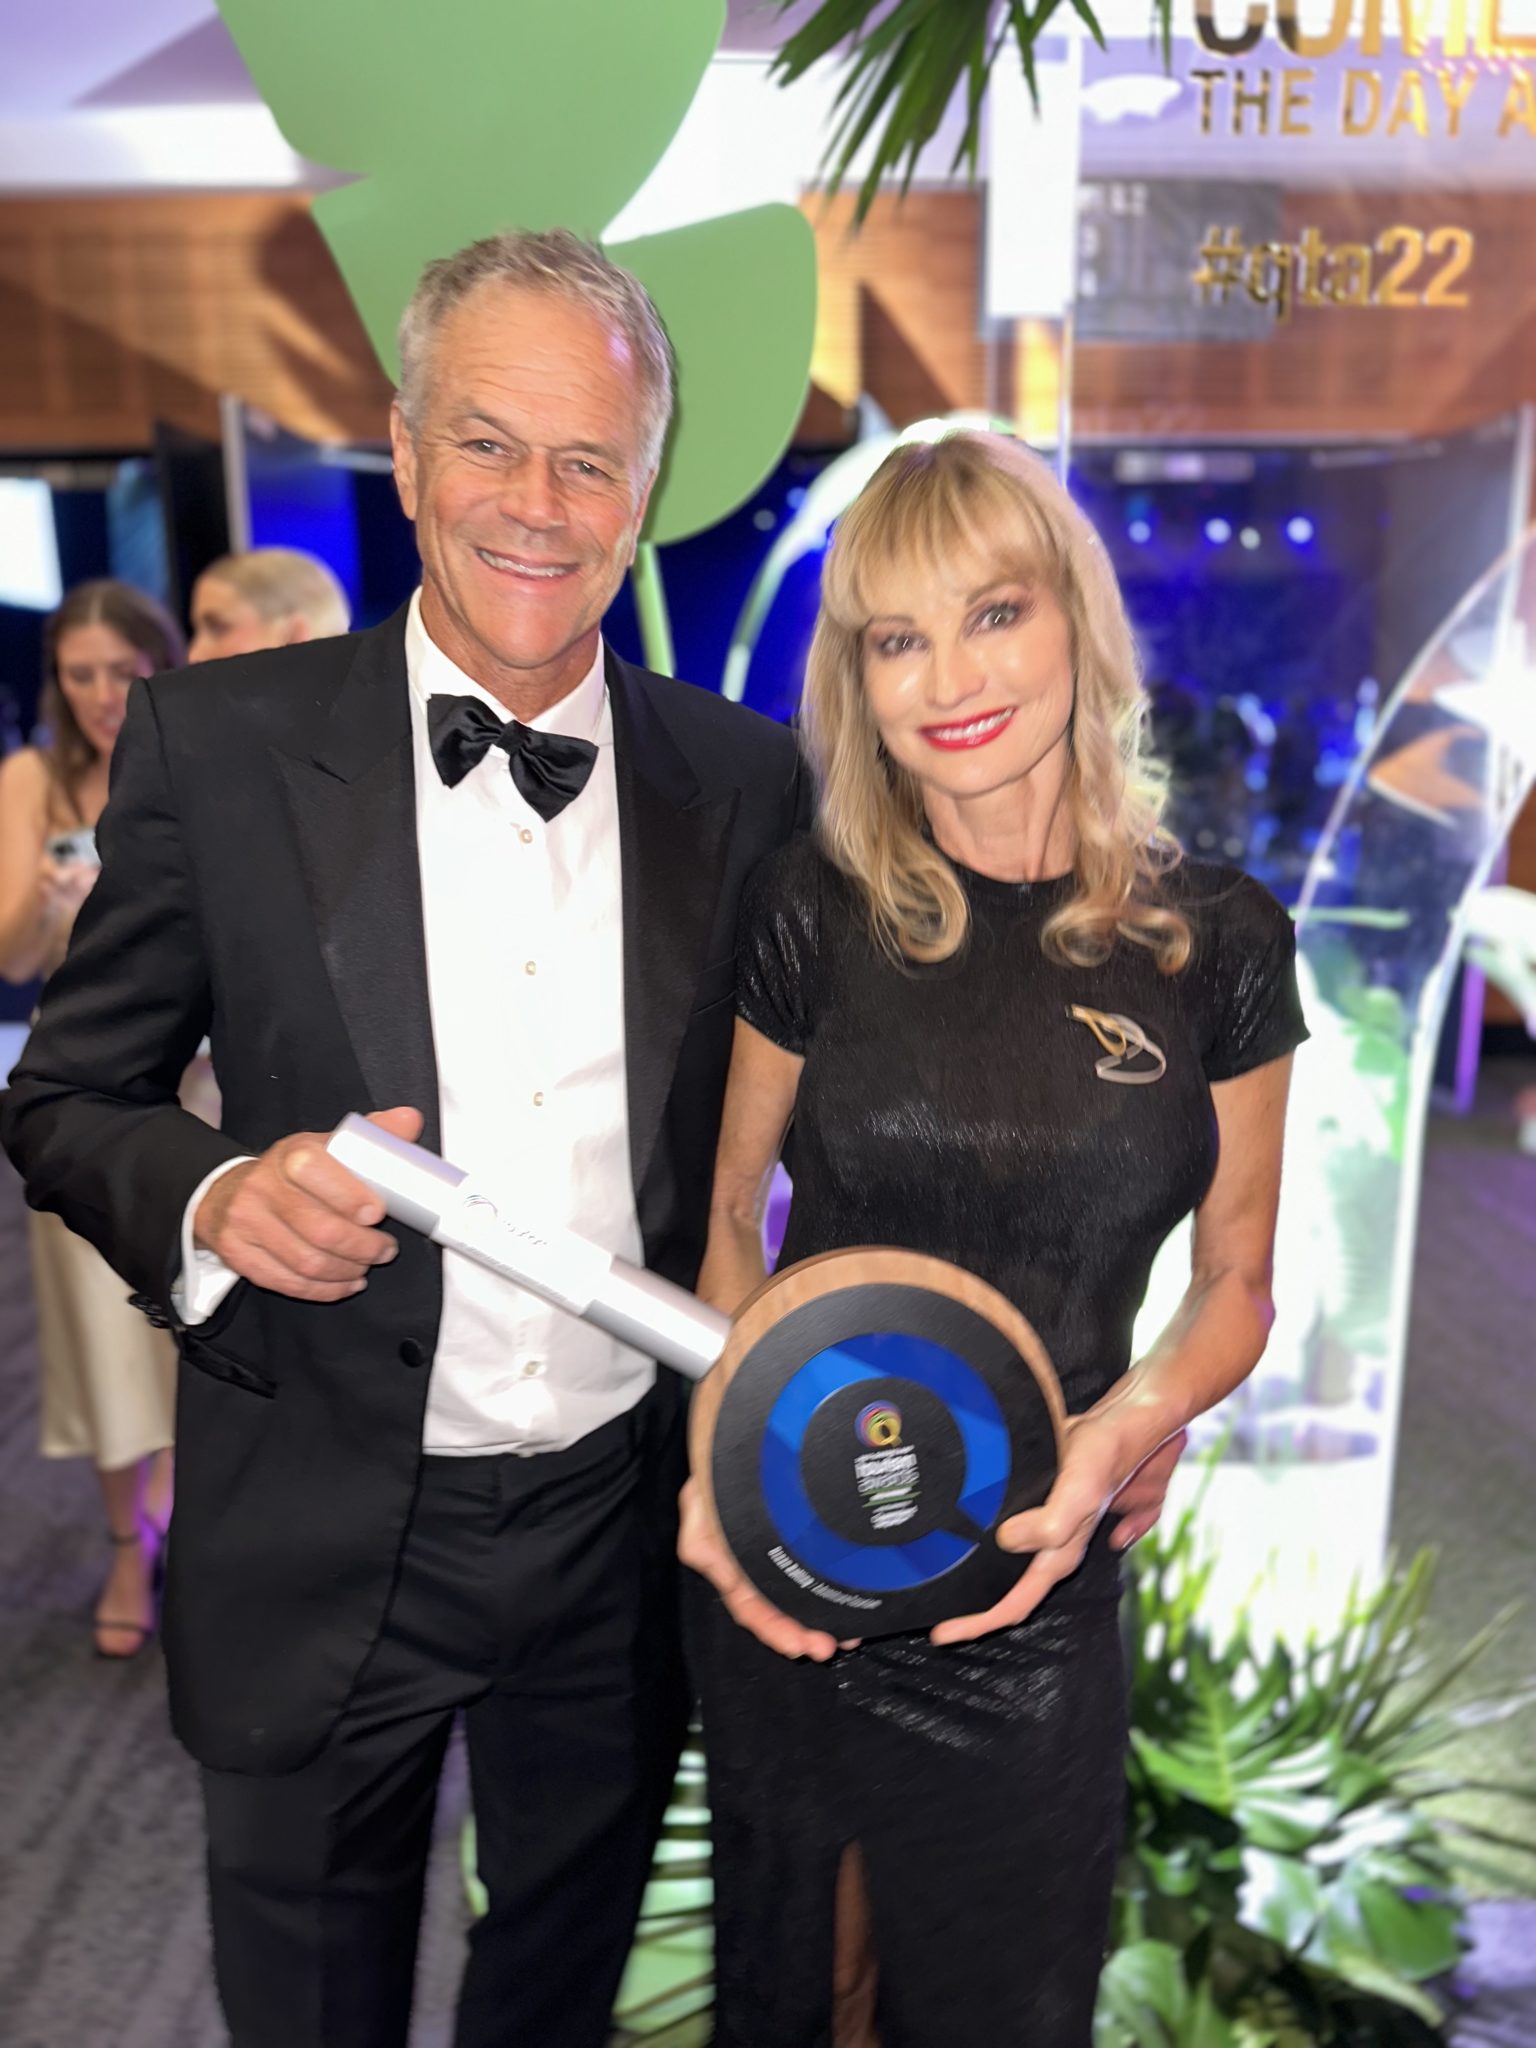 2022 north queensland tourism and events awards